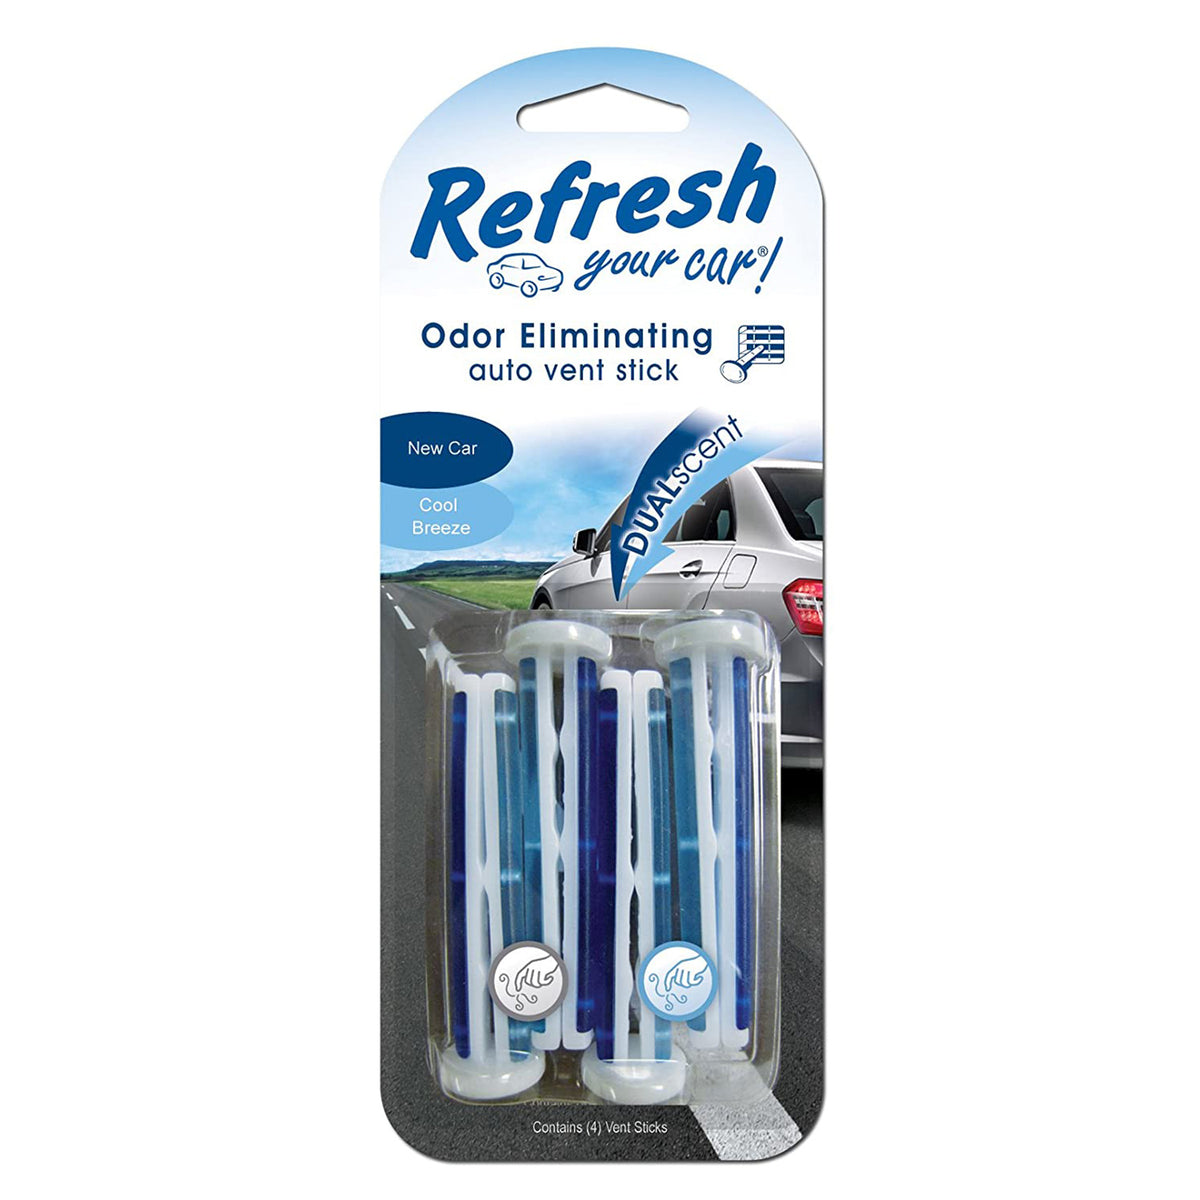 Dual Scent New Car & Cool Breeze scent Contains: 4 pieces